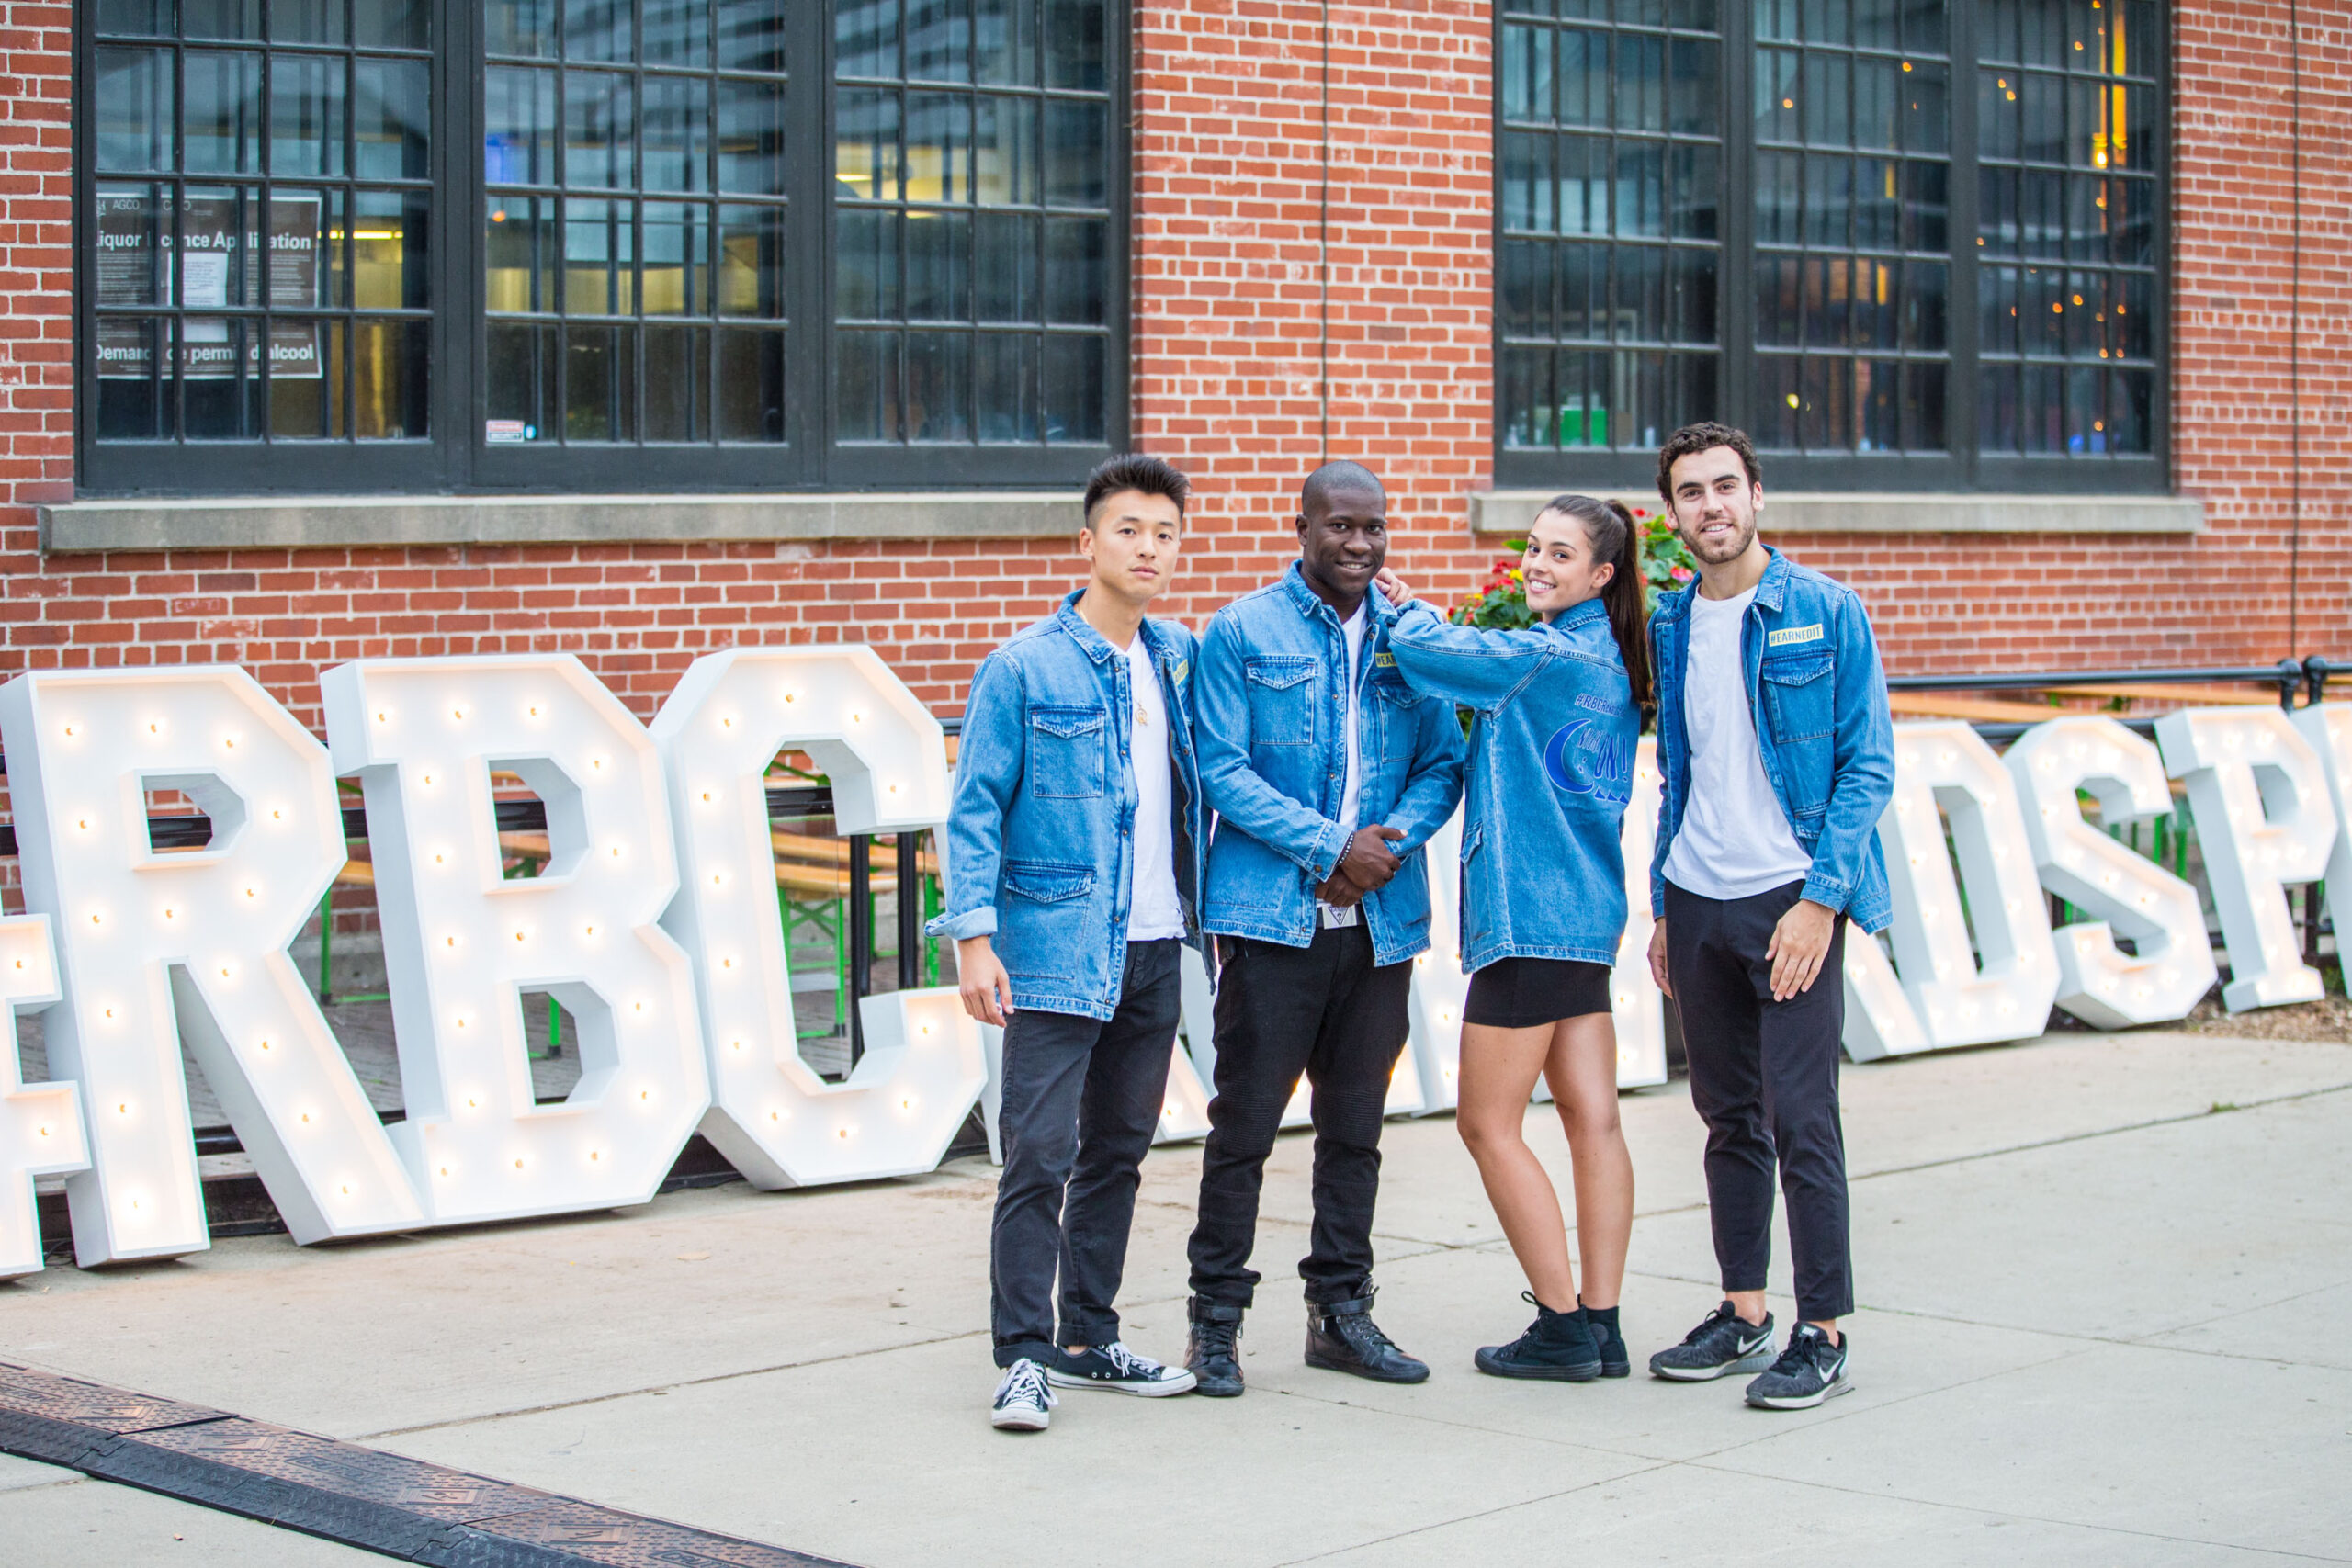 a group of young people posing in denim jackets in front of a brick building